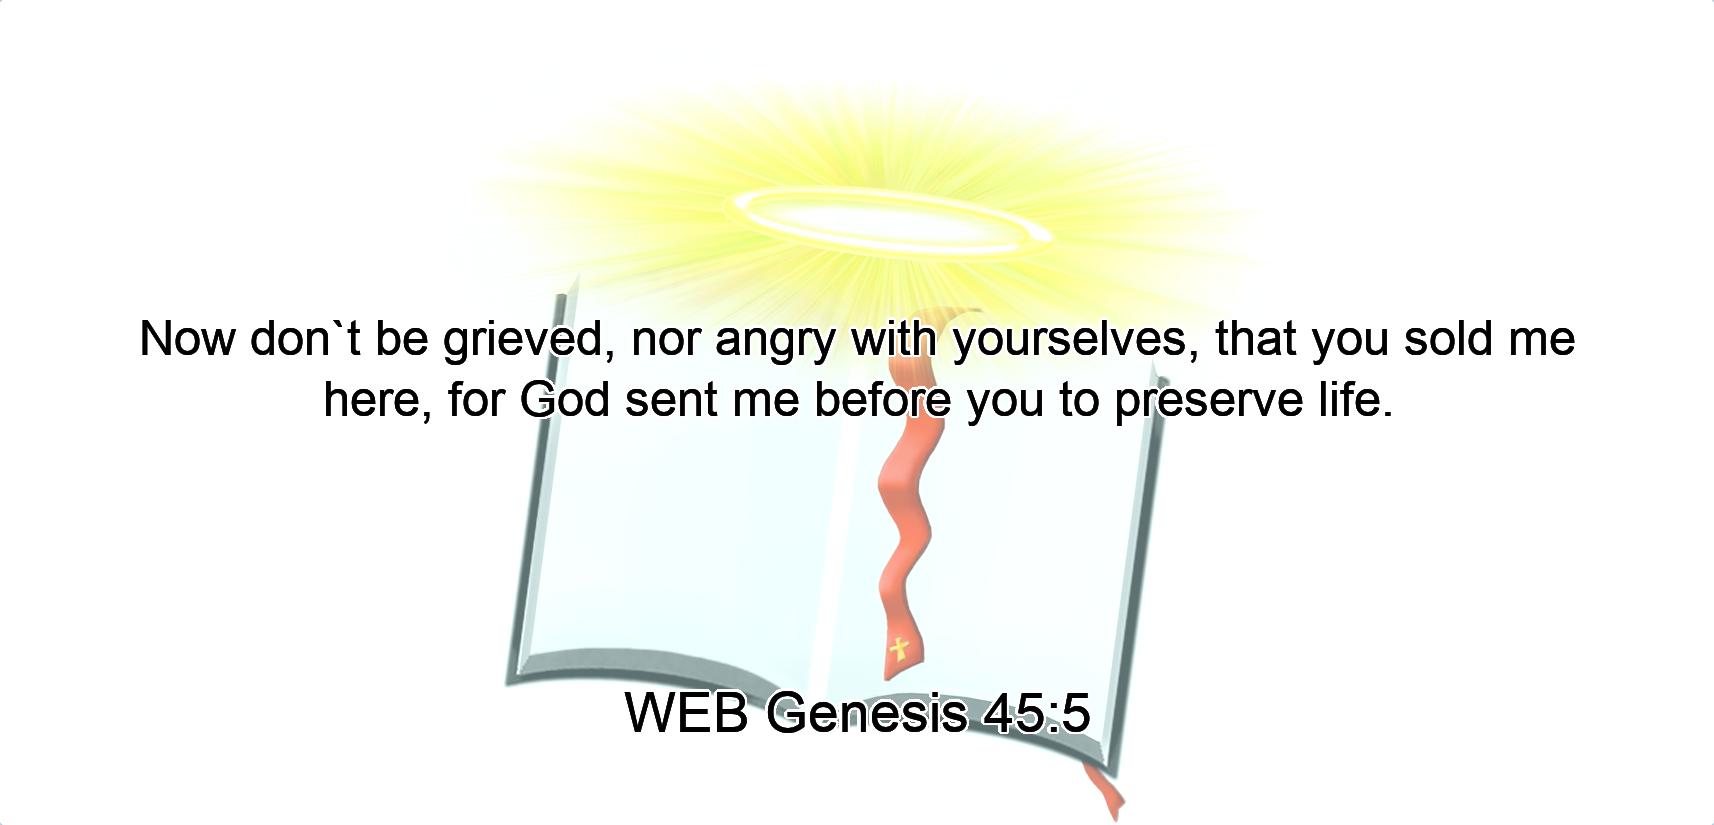 Now don`t be grieved, nor angry with yourselves, that you sold me here, for God sent me before you to preserve life.